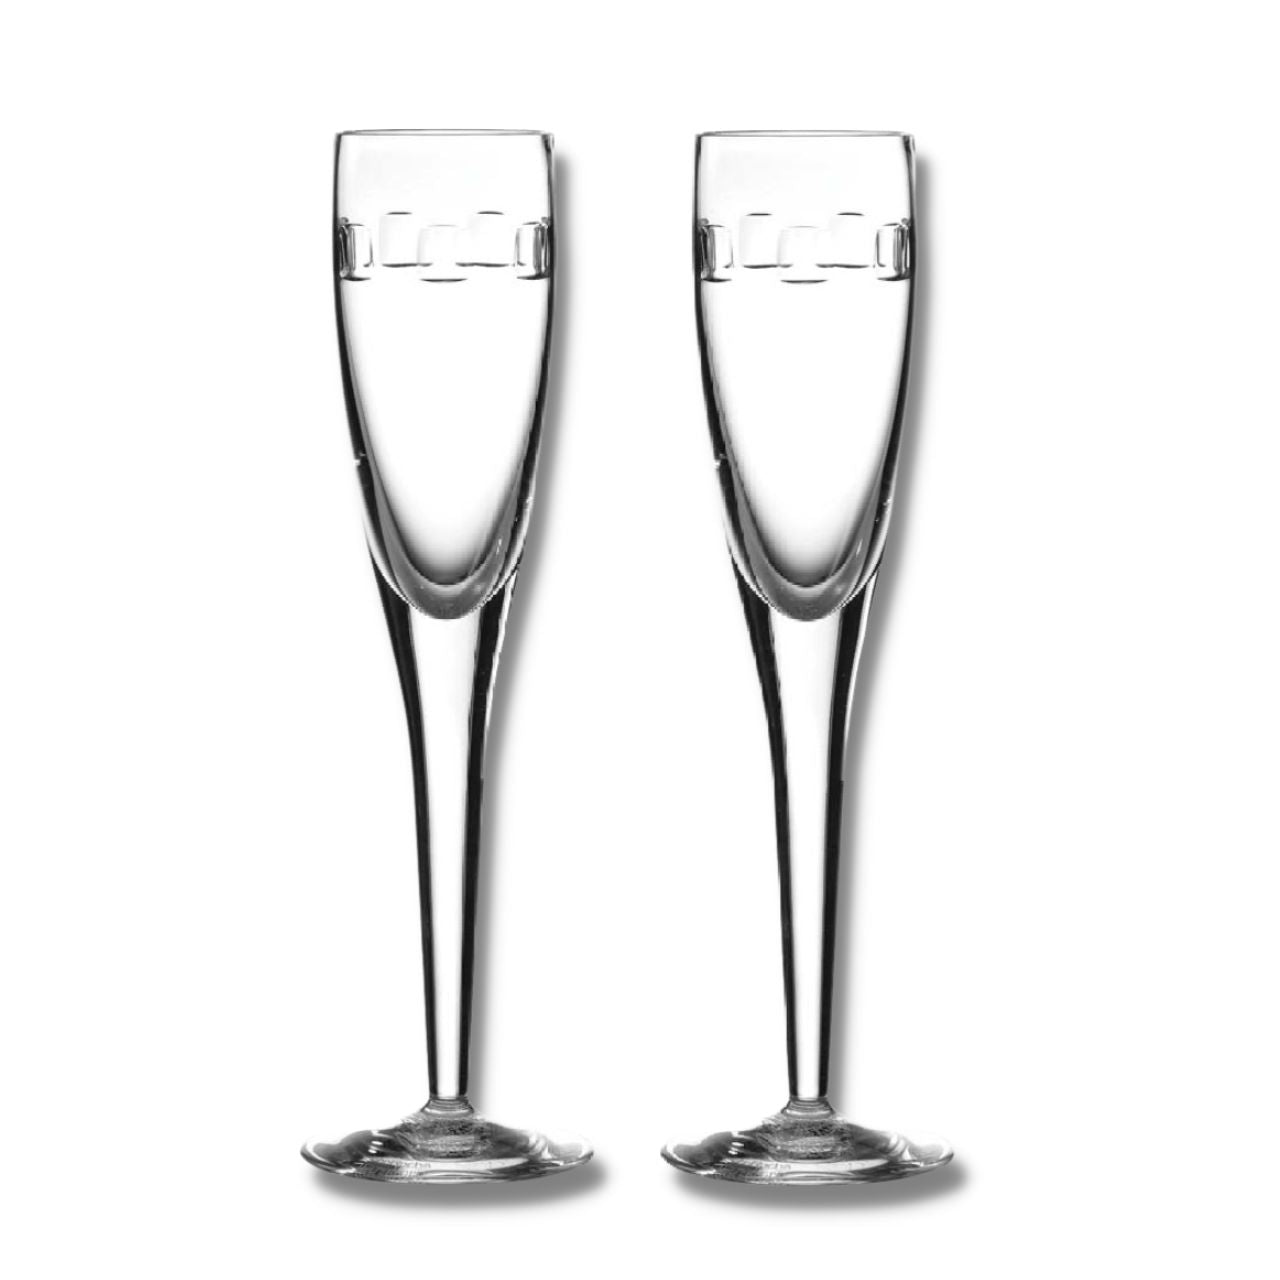 John Rocha Geo Flute Champagne by Waterford Pair - Boxed Pair  John Rocha's Geo collection epitomises his design style - evoking simple elegance and clean, contemporary vision contrasted by a dynamic geometric motif on brilliant crystal. Raise a toast with the tall and slender Geo Champagne Flute, perfect for sparkling wine or spumante and styled with the collection's signature geometric designs.